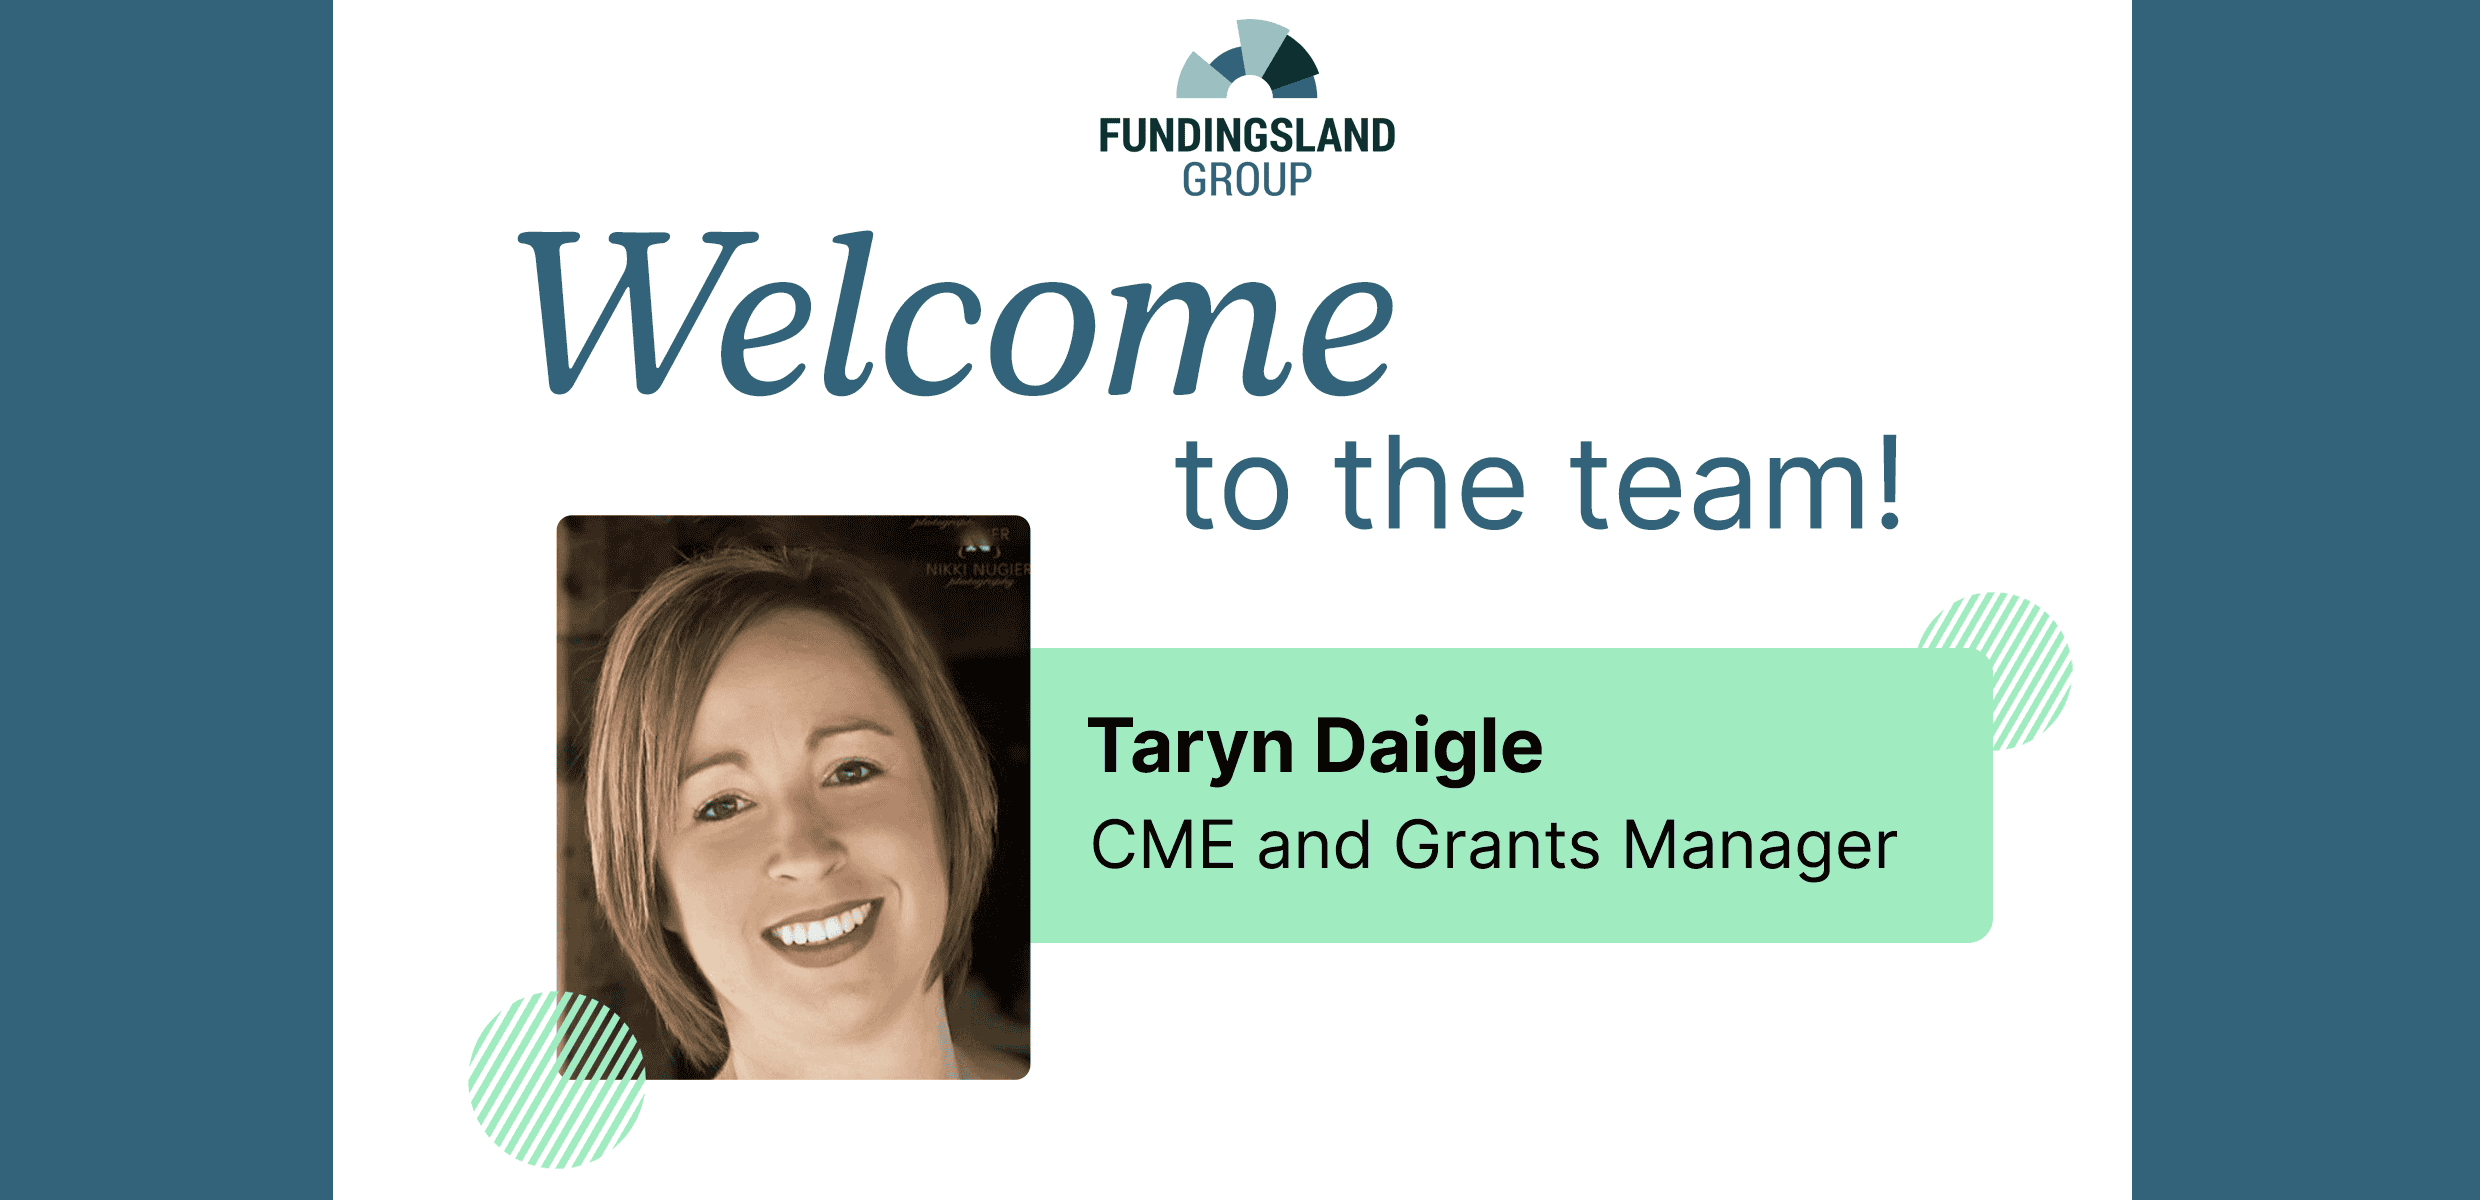 Welcome Taryn Daigle to Our Team!